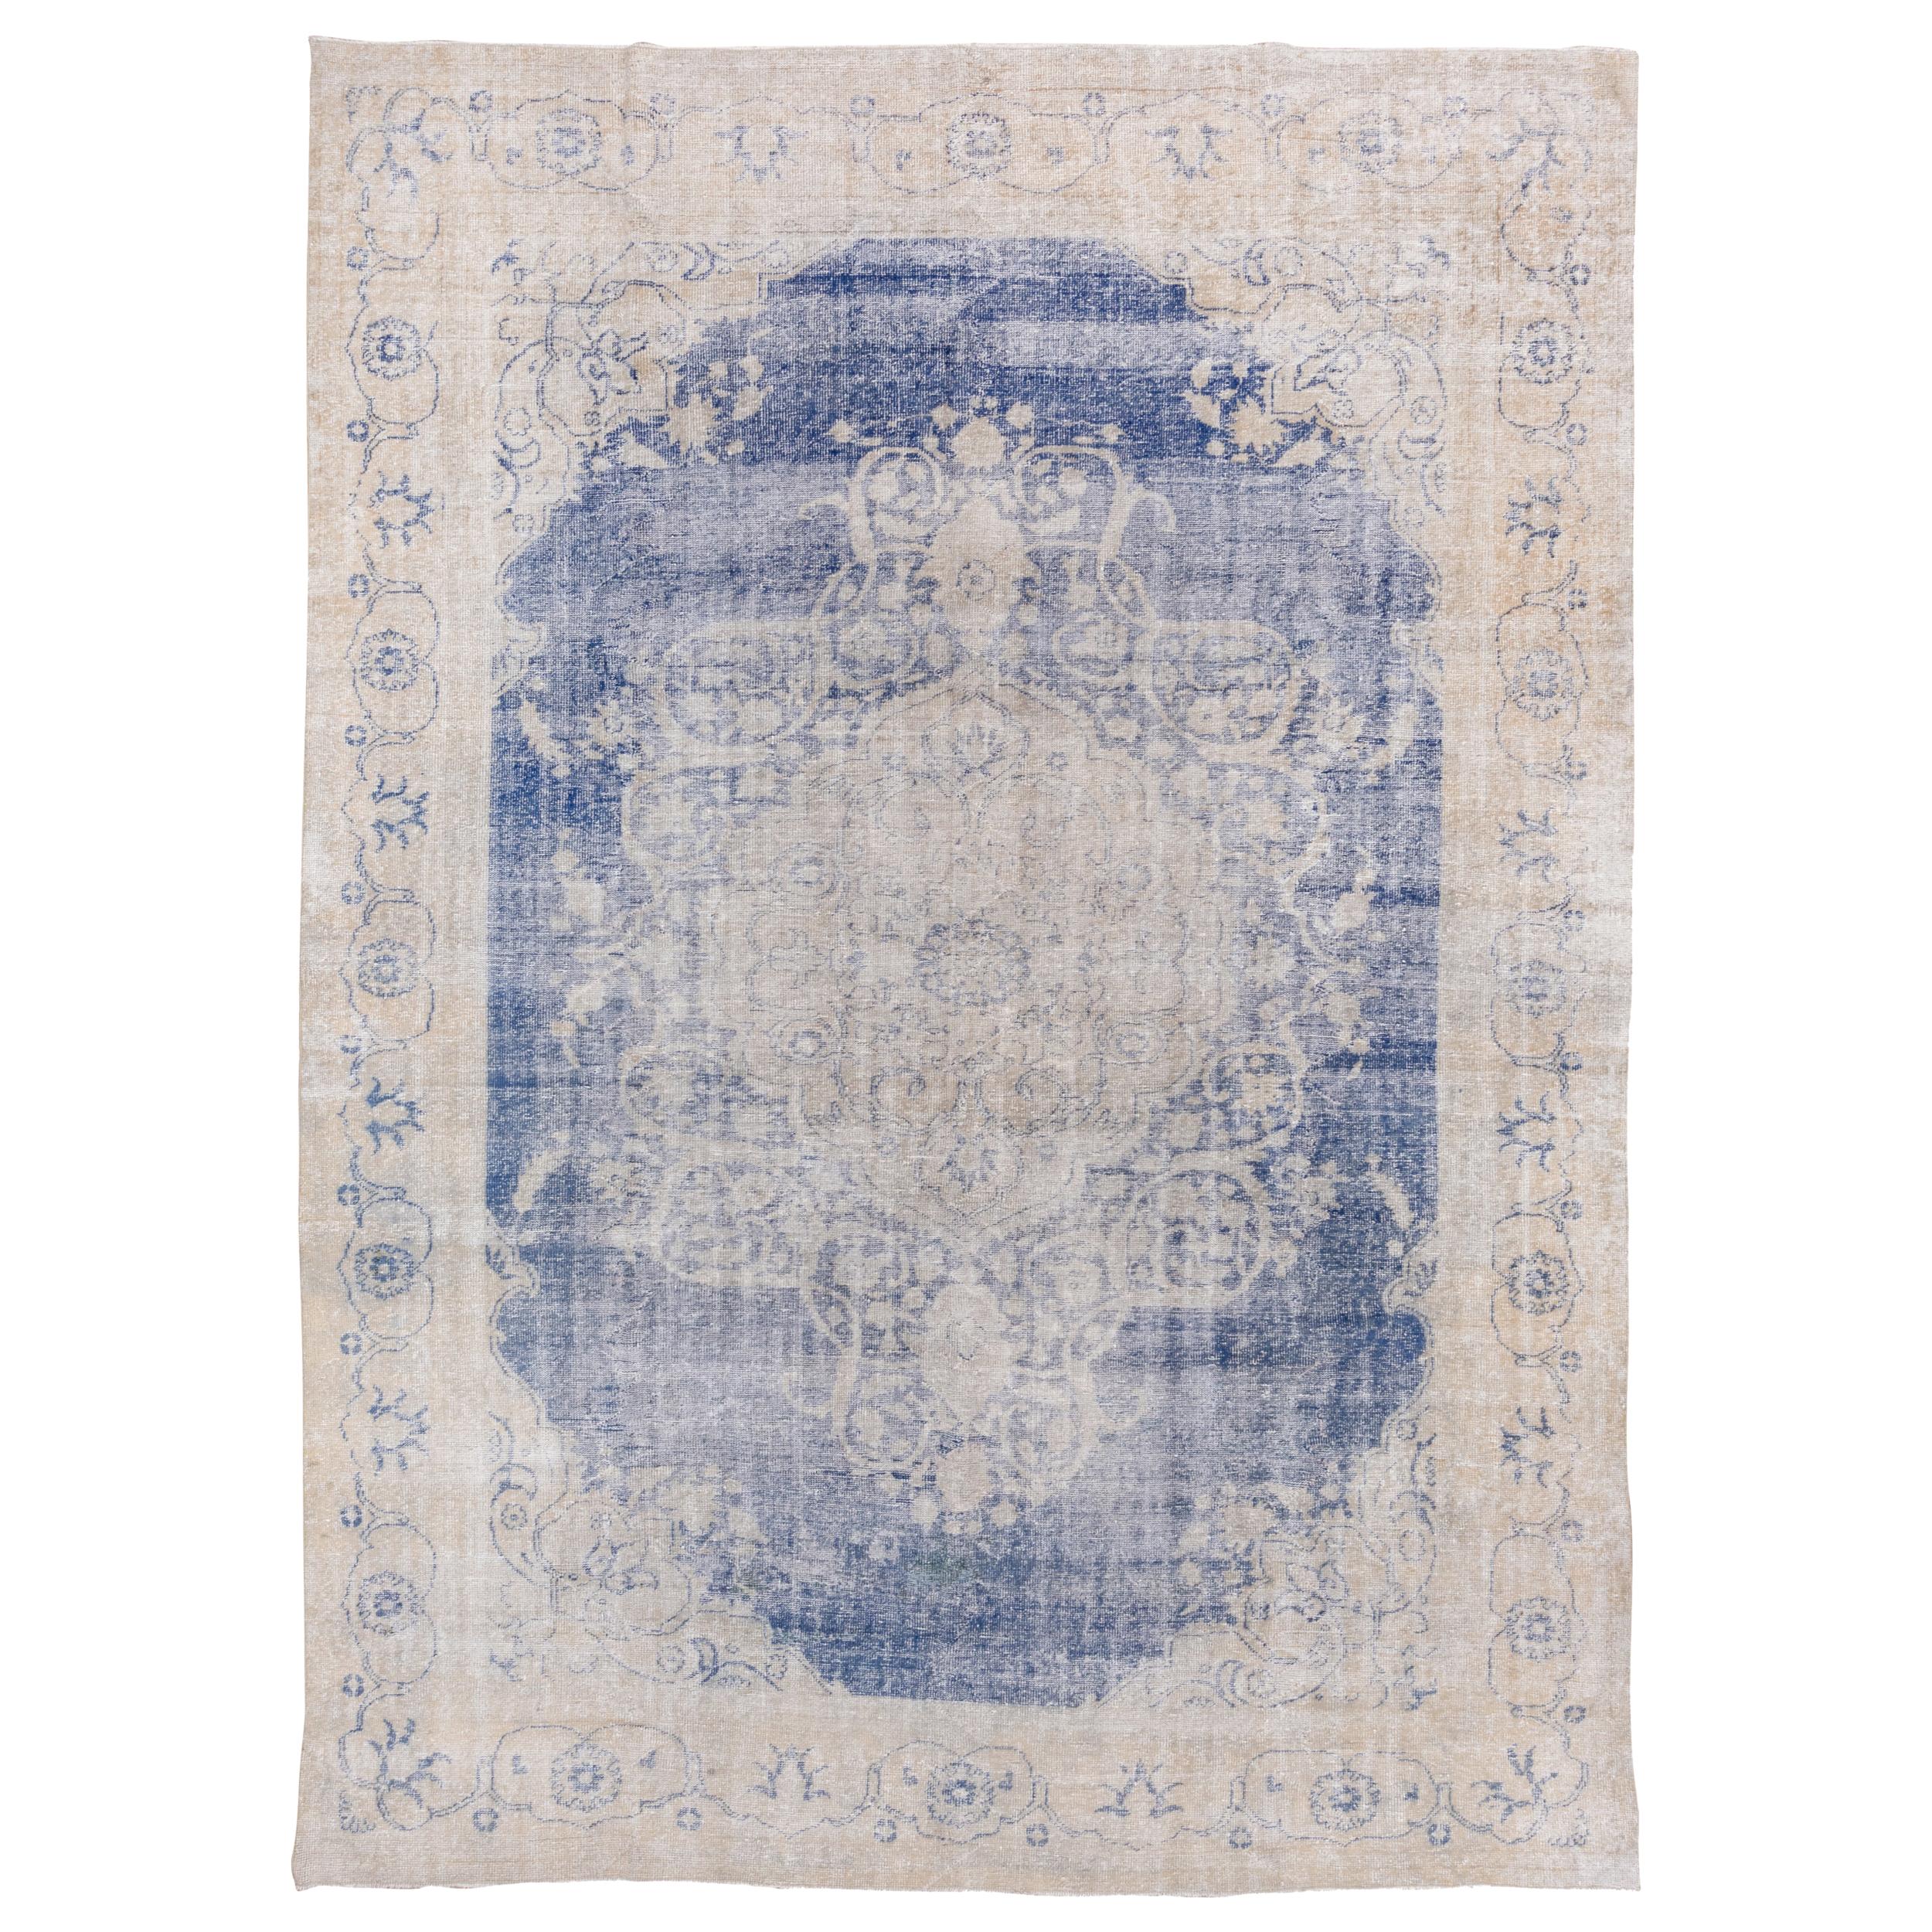 Shabby Chic Antique Turkish Oushak Rug, Royal Blue Outer Field, circa 1920s For Sale